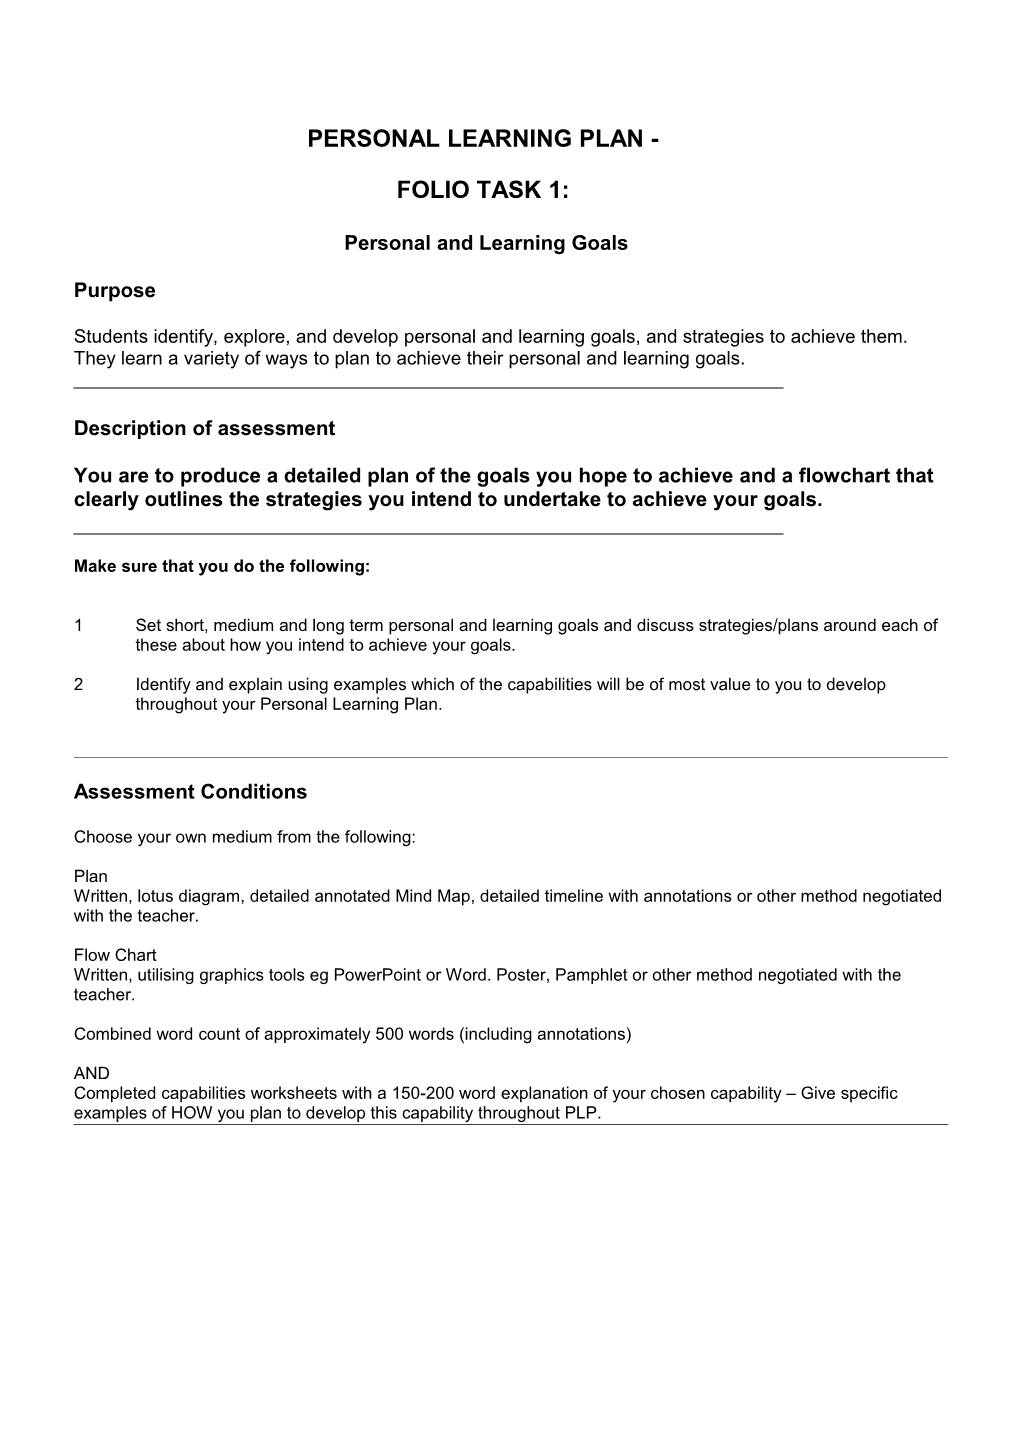 Assessment 1: Personal Learning Plan